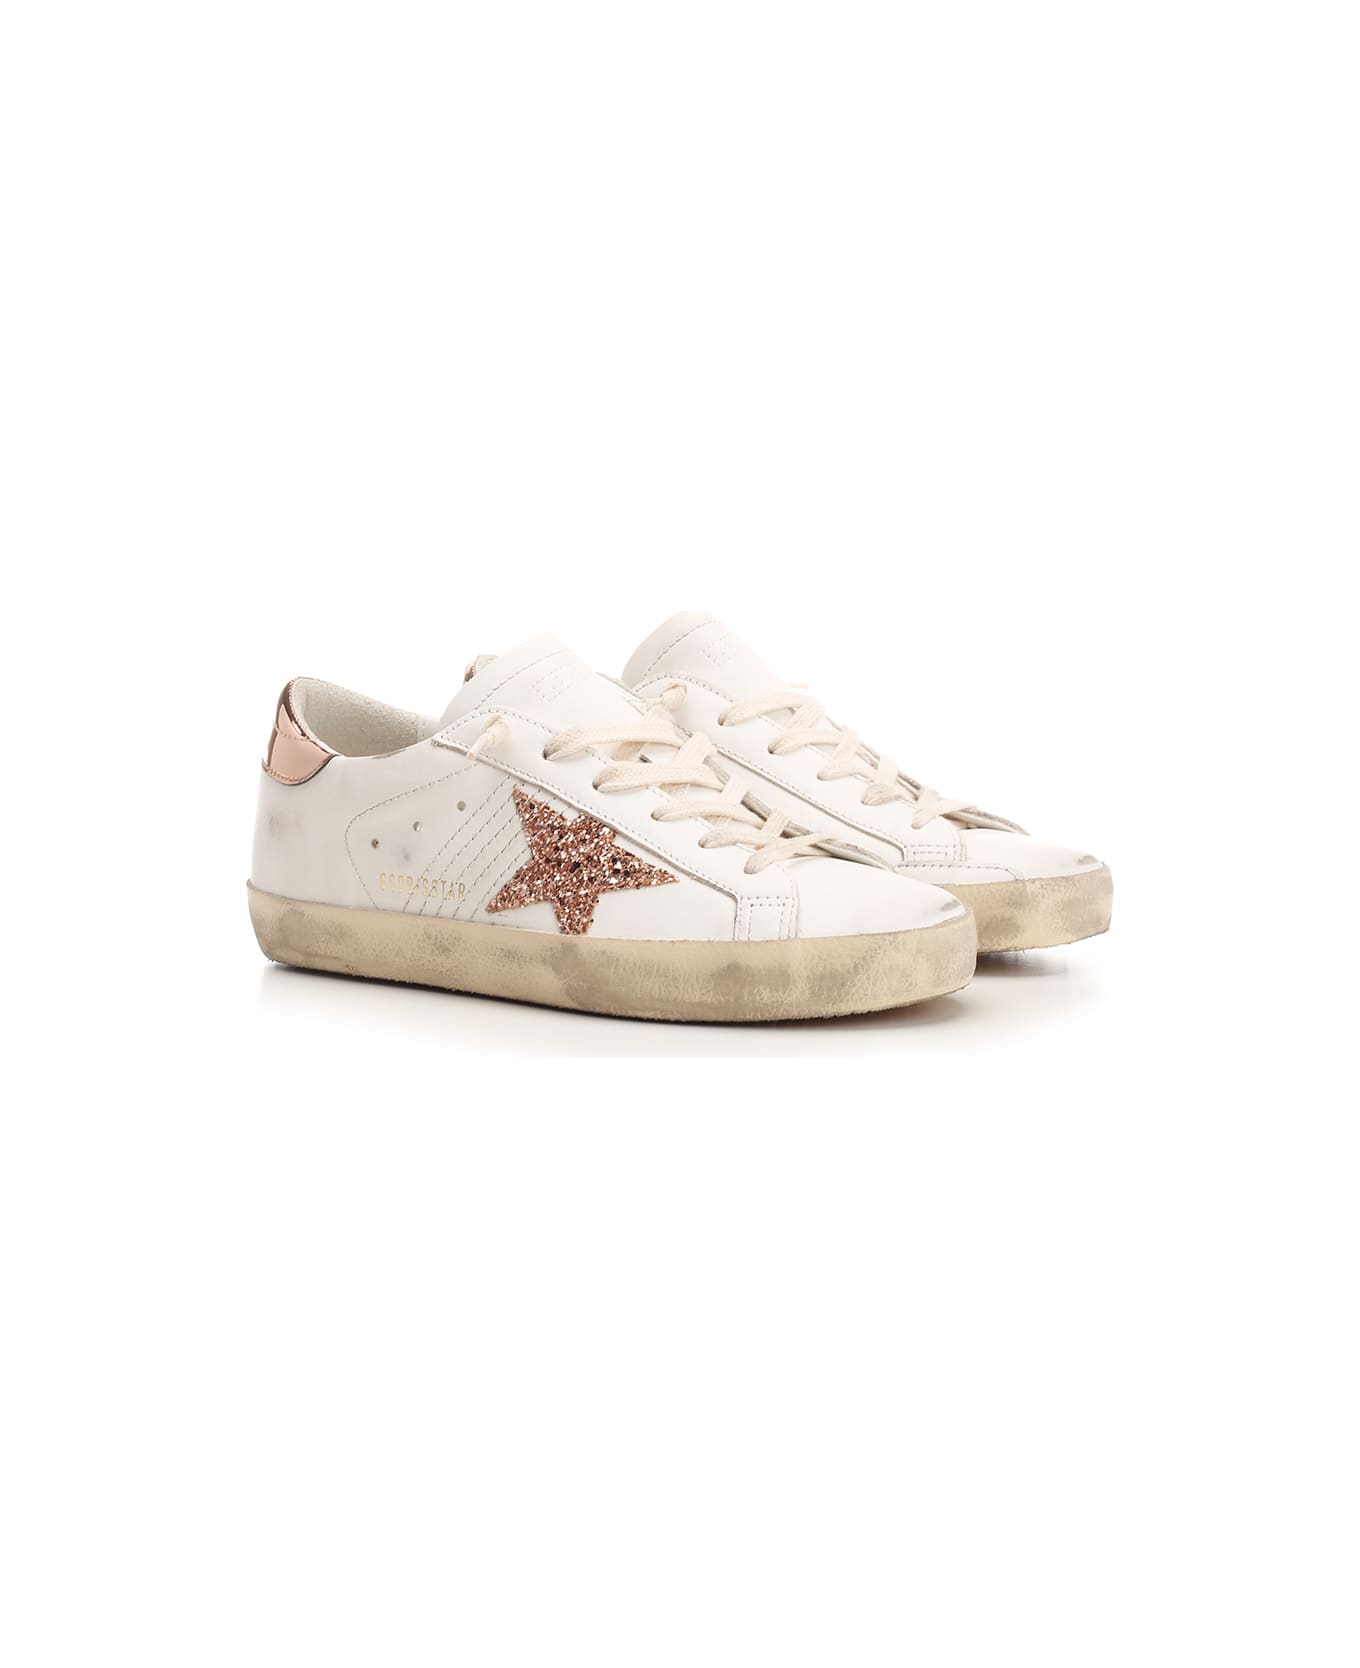 Golden Goose Superstar Classic Sneakers - simone rocha embellished leather sandals